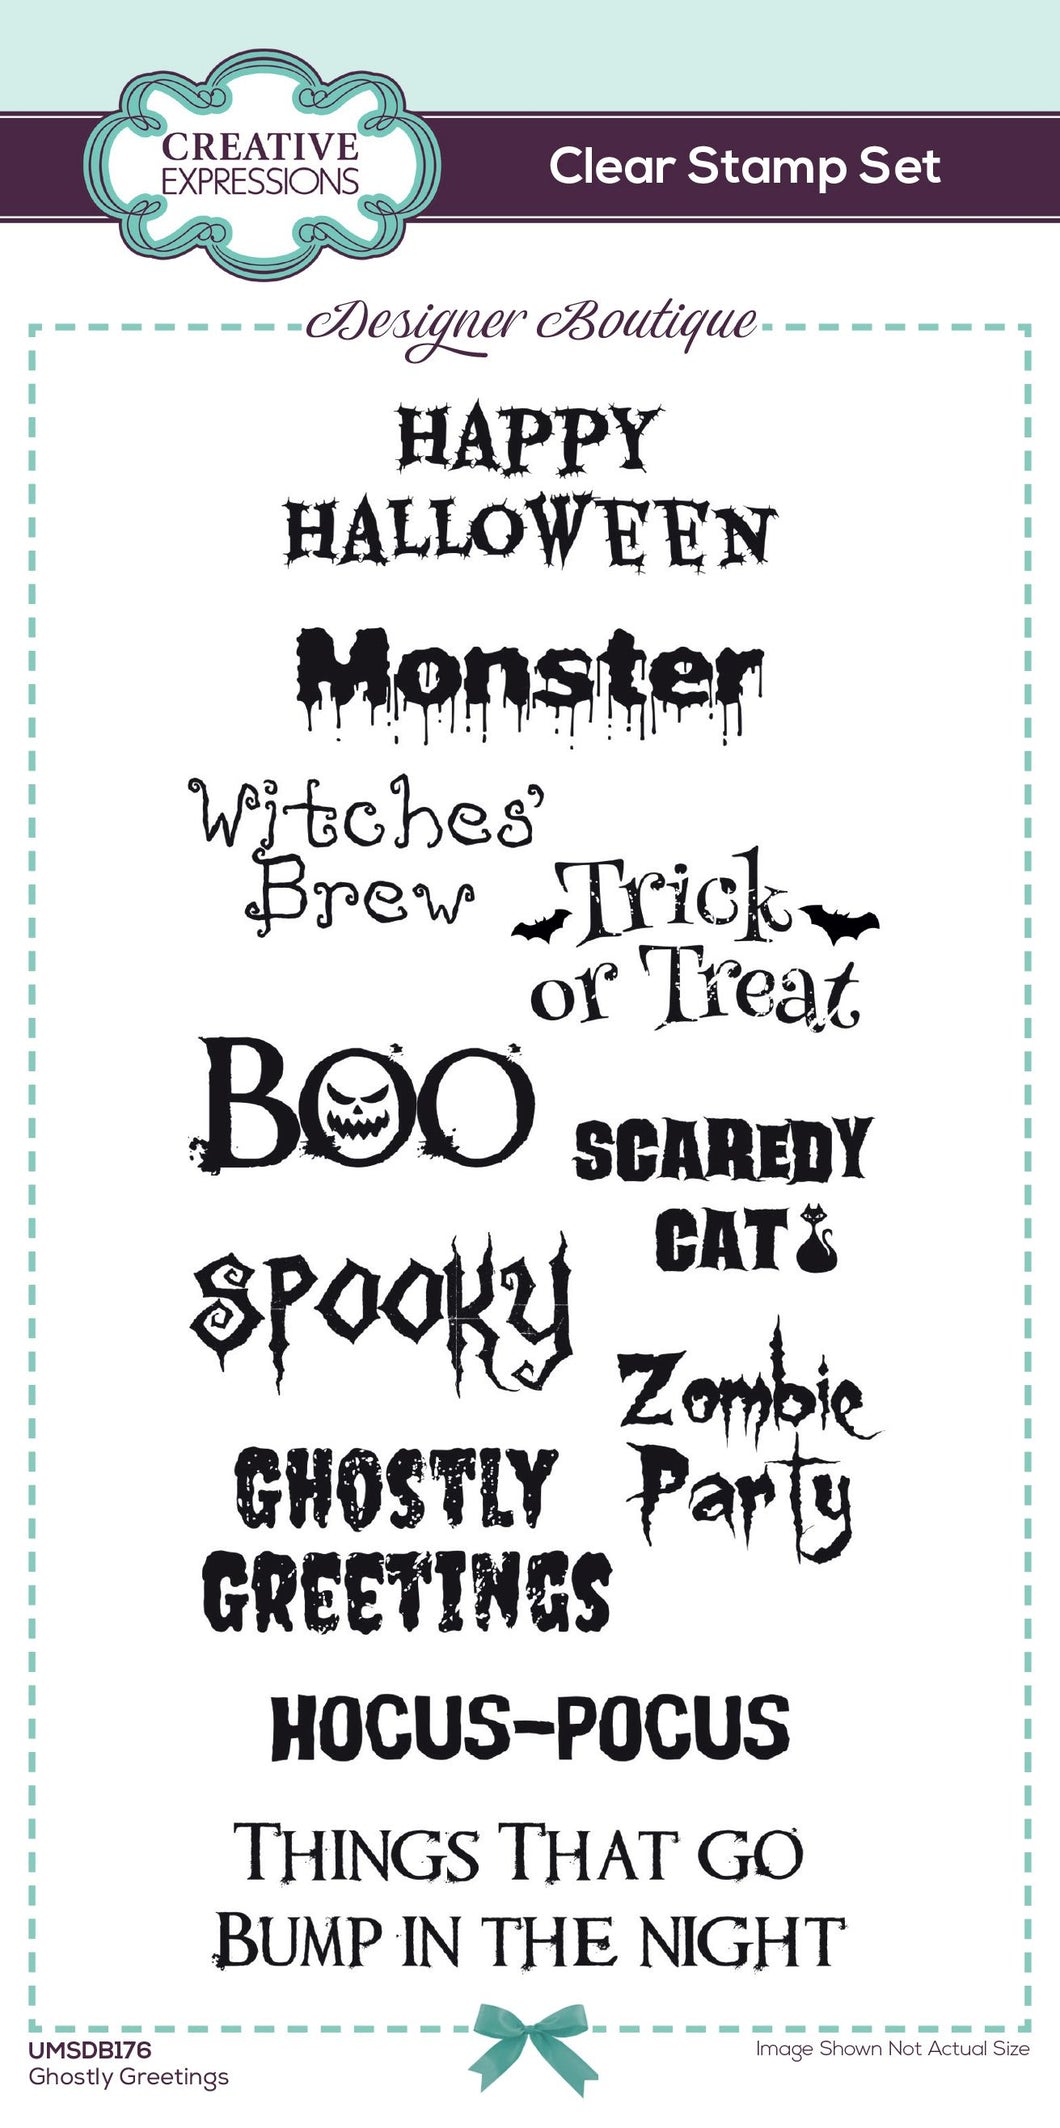 Creative Expressions Designer Boutique DL Clear Stamp Set - Ghostly Greetings